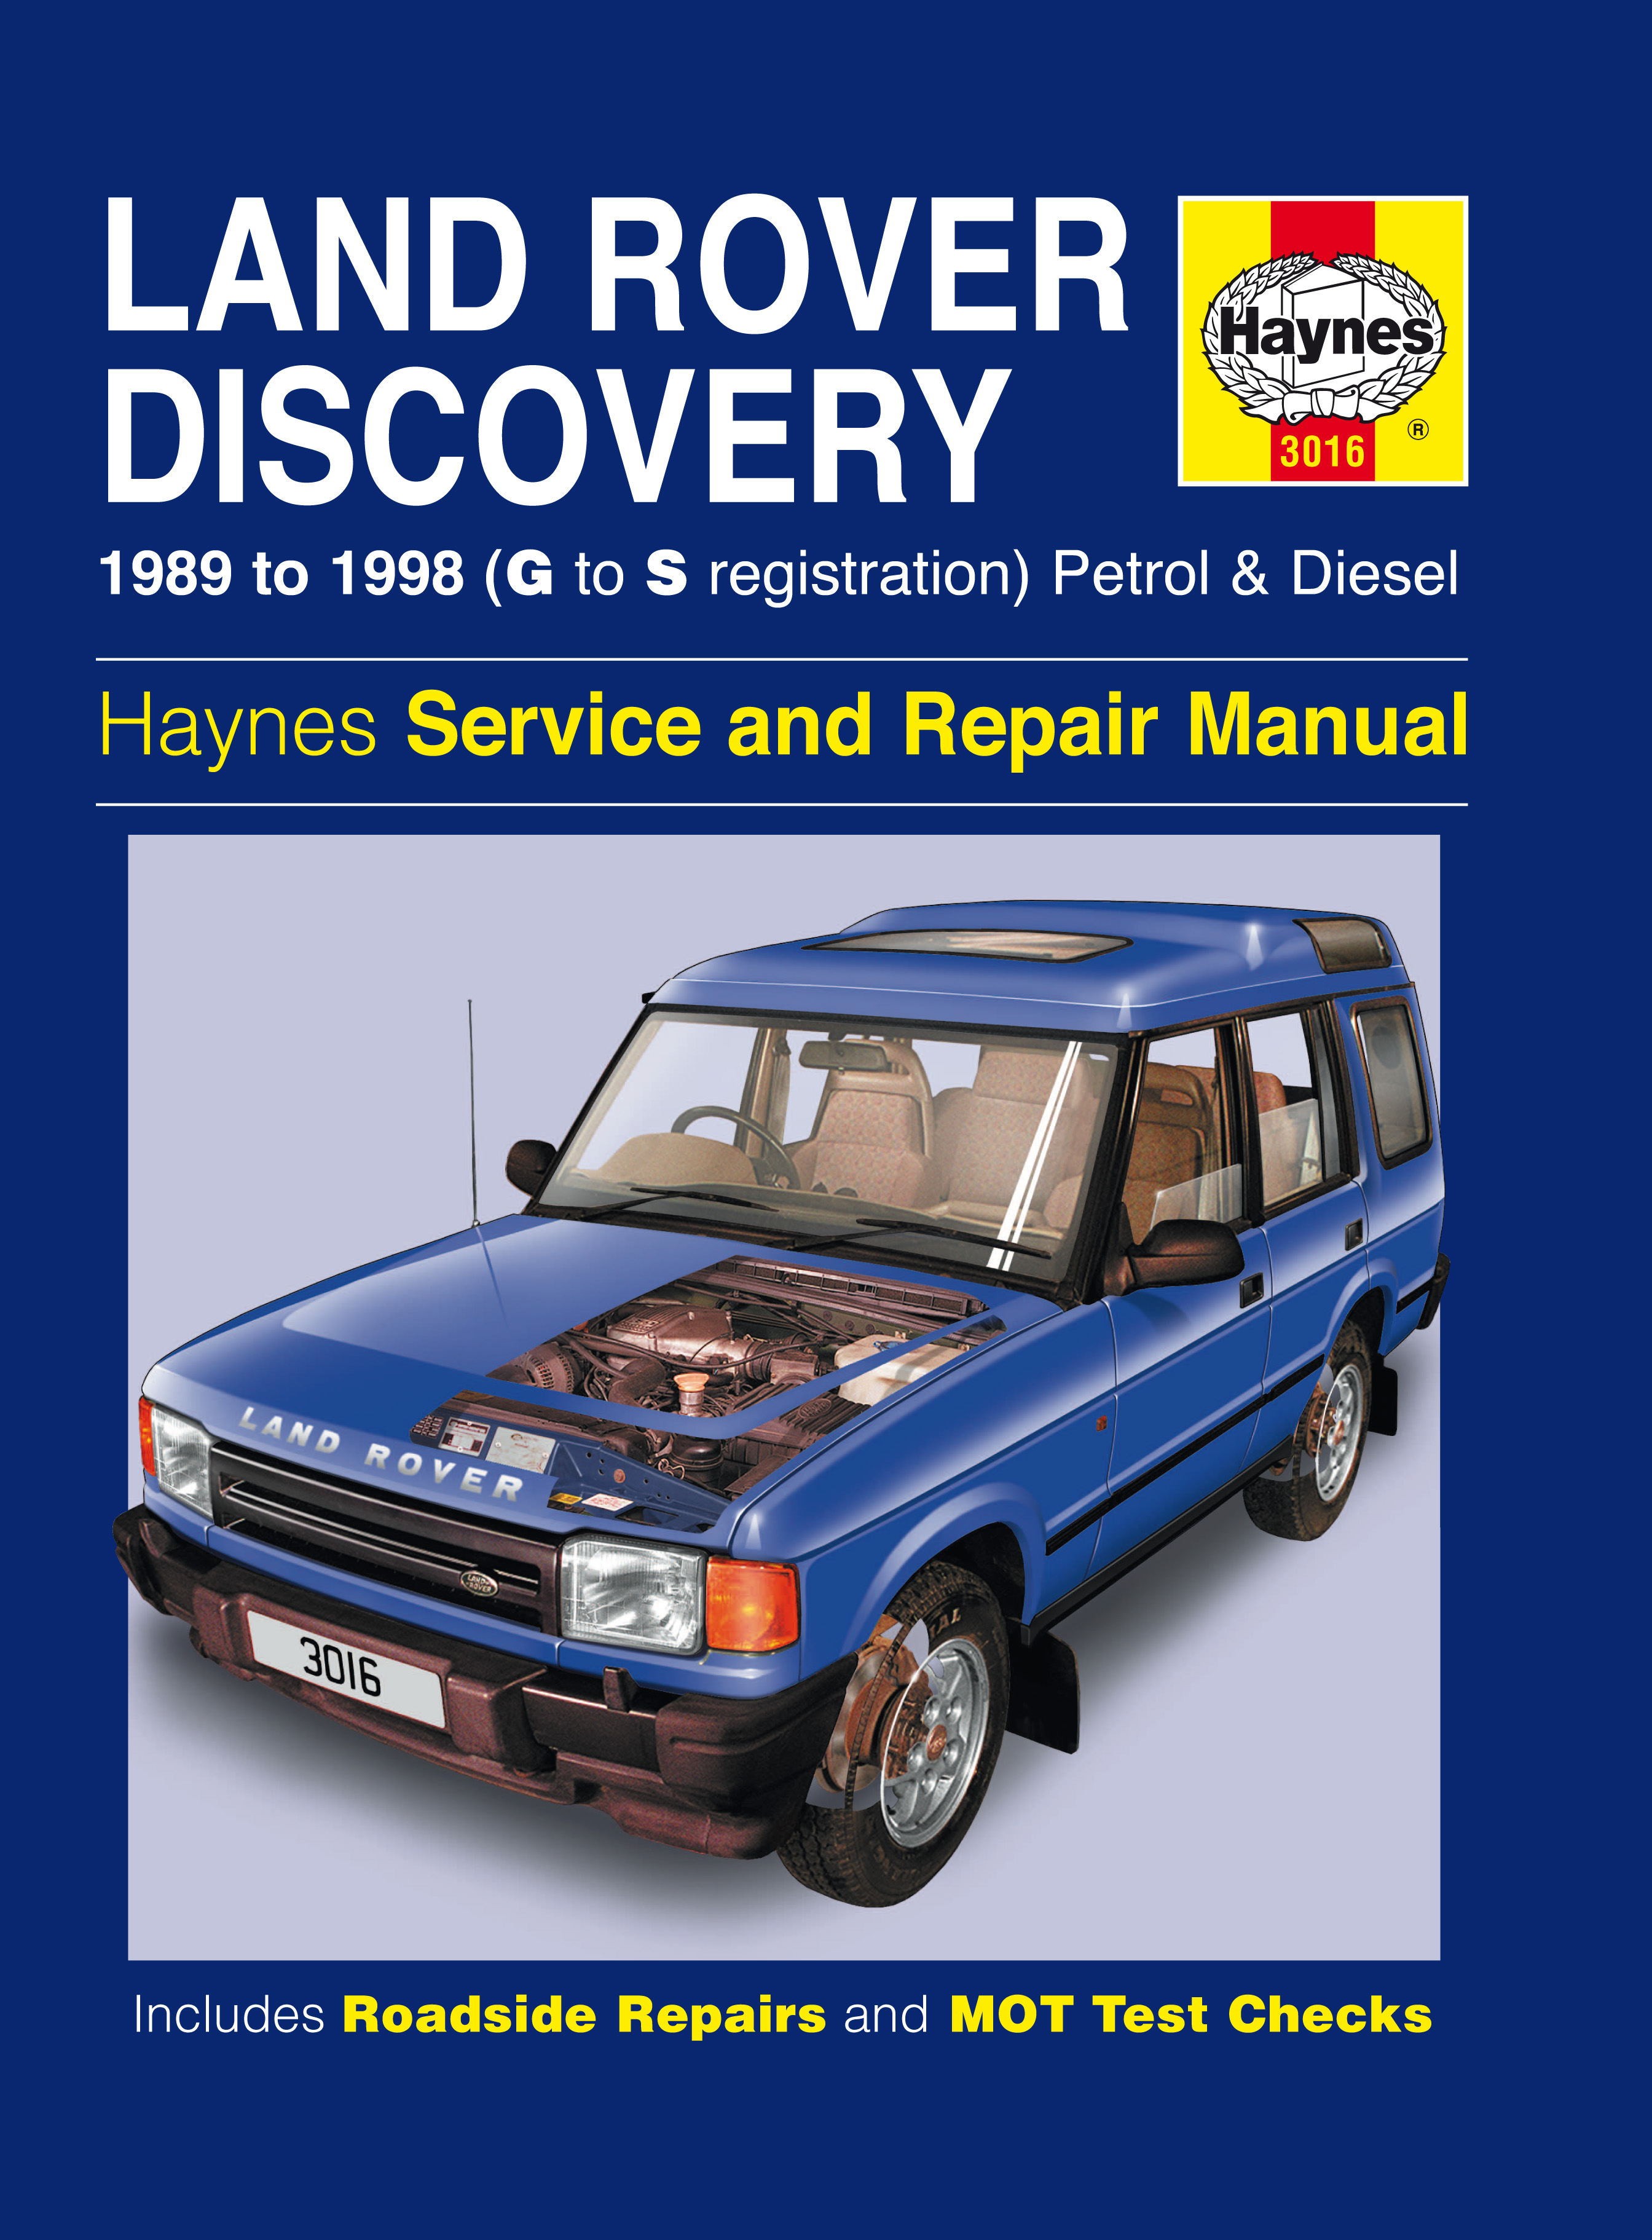 Haynes Workshop Manual Land Rover Discovery 1989-1998 New Service Repair